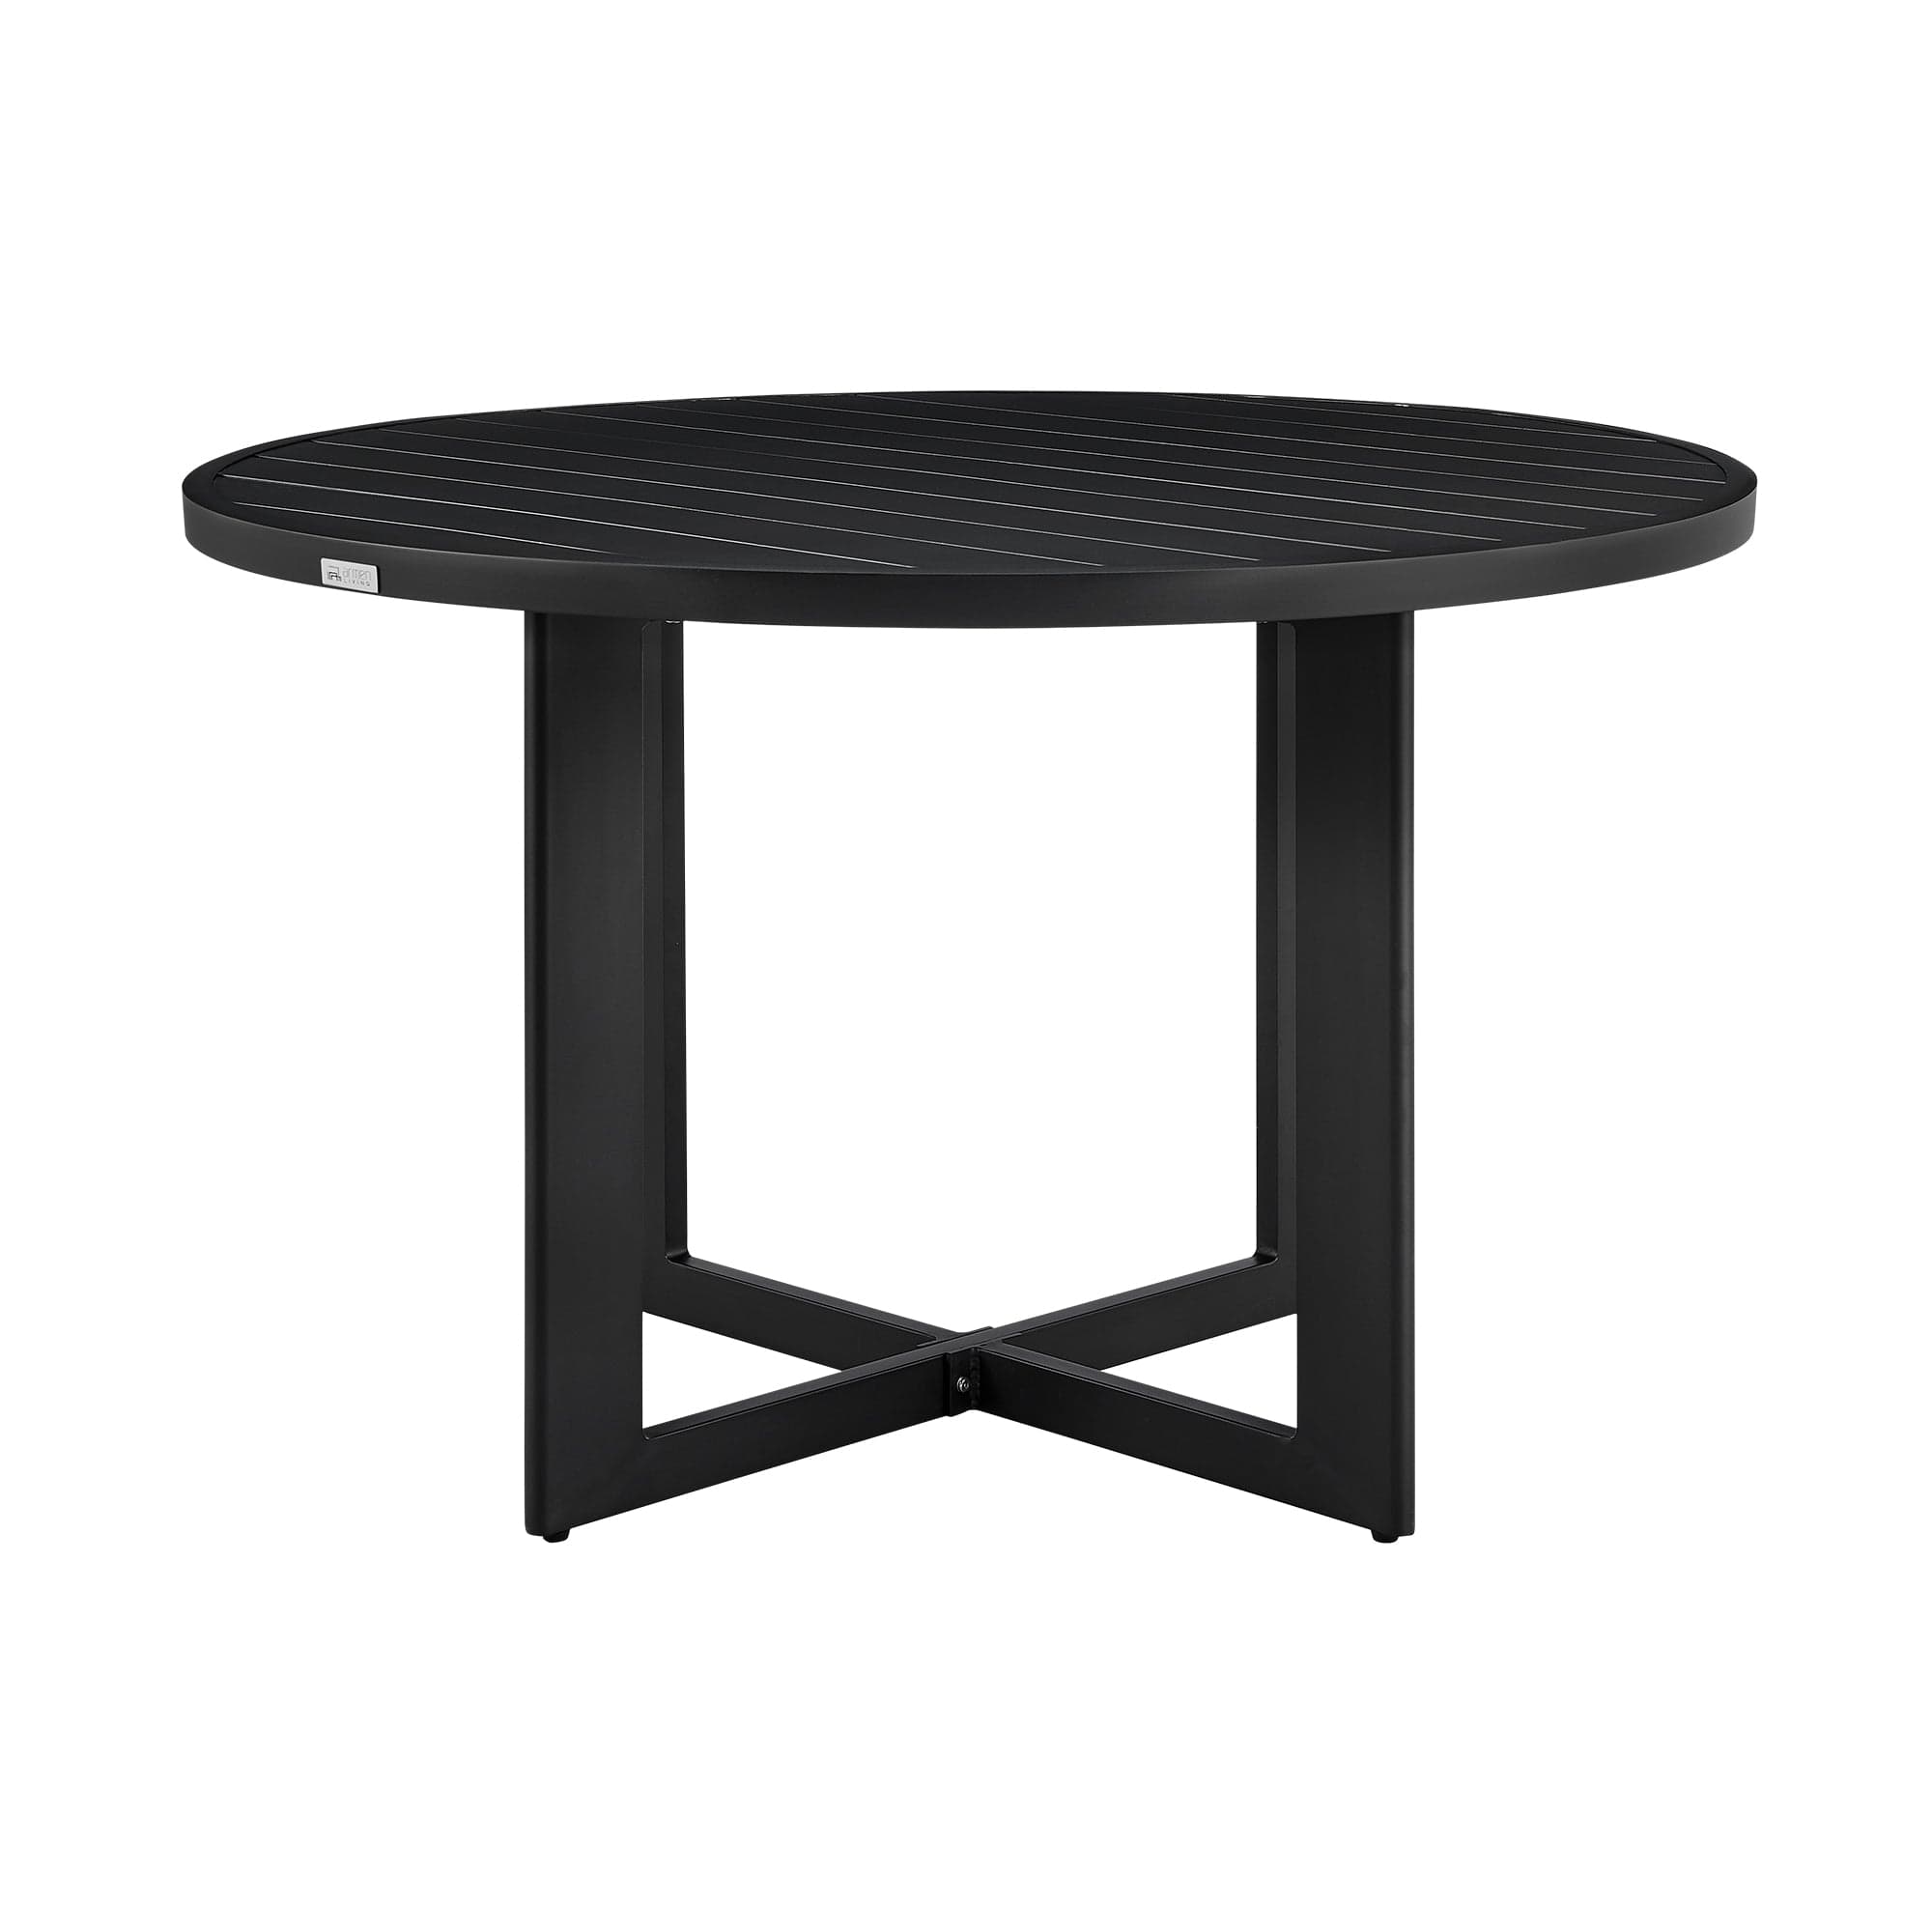 Armen Living Outdoor Dining Table Armen Living | Cayman Outdoor Patio Round Dining Table in Aluminum | LCCCDIRDBL